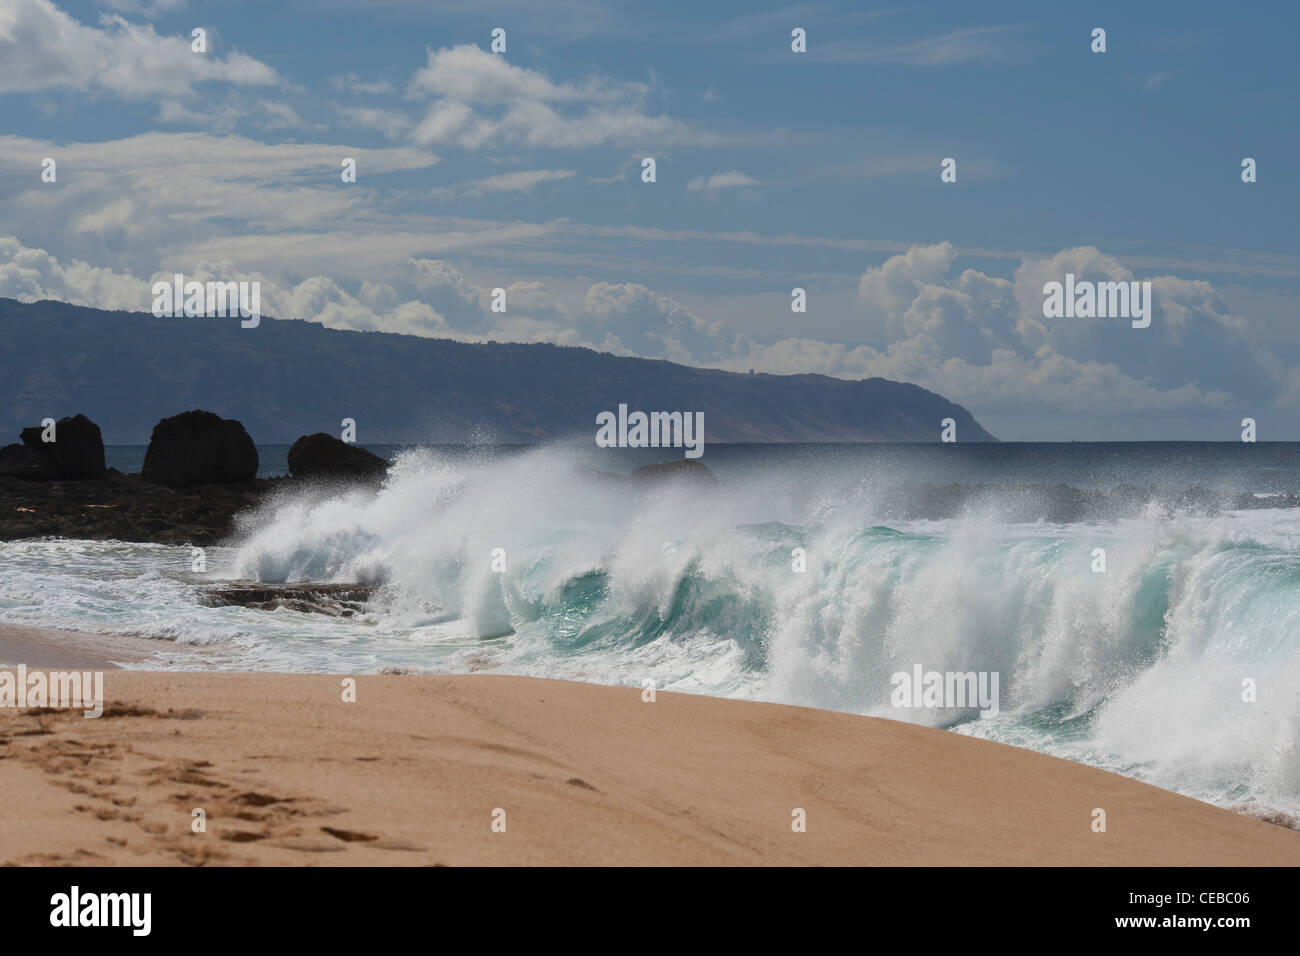 Waves breaking on North Shore, Oahu Stock Photo